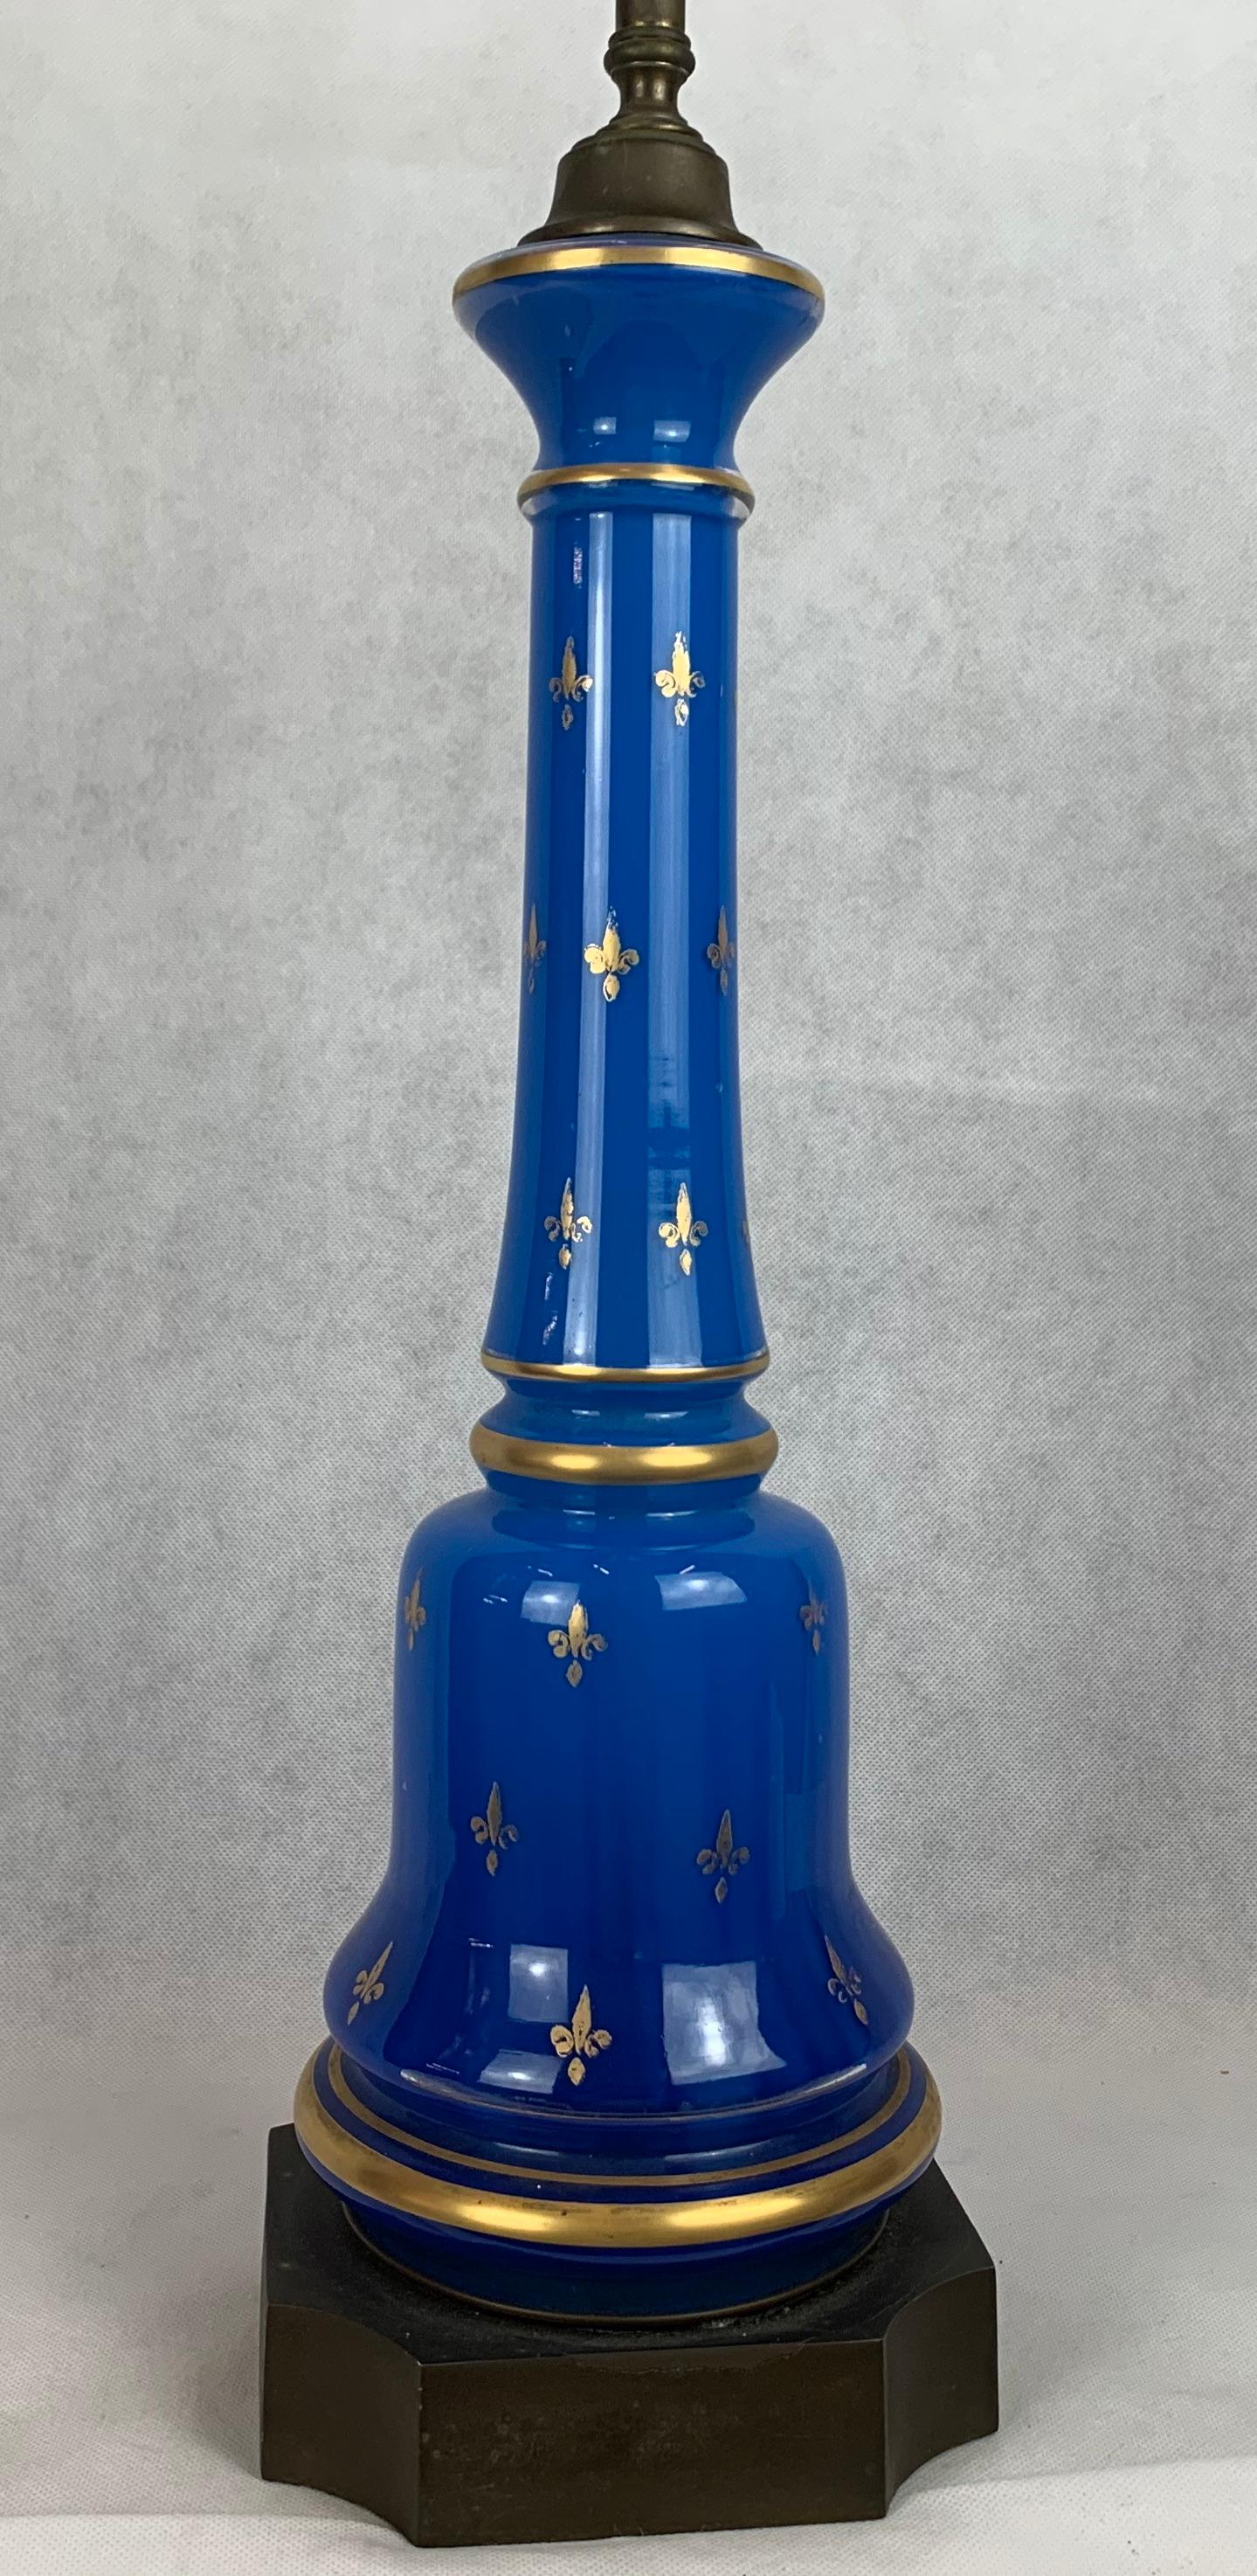  French blue opaline glass lamp mounted on a black base. The lamp has gold fleur-de-lys painted on the exterior.
Shade not included.
Measurements: Glass portion of lamp 18.25